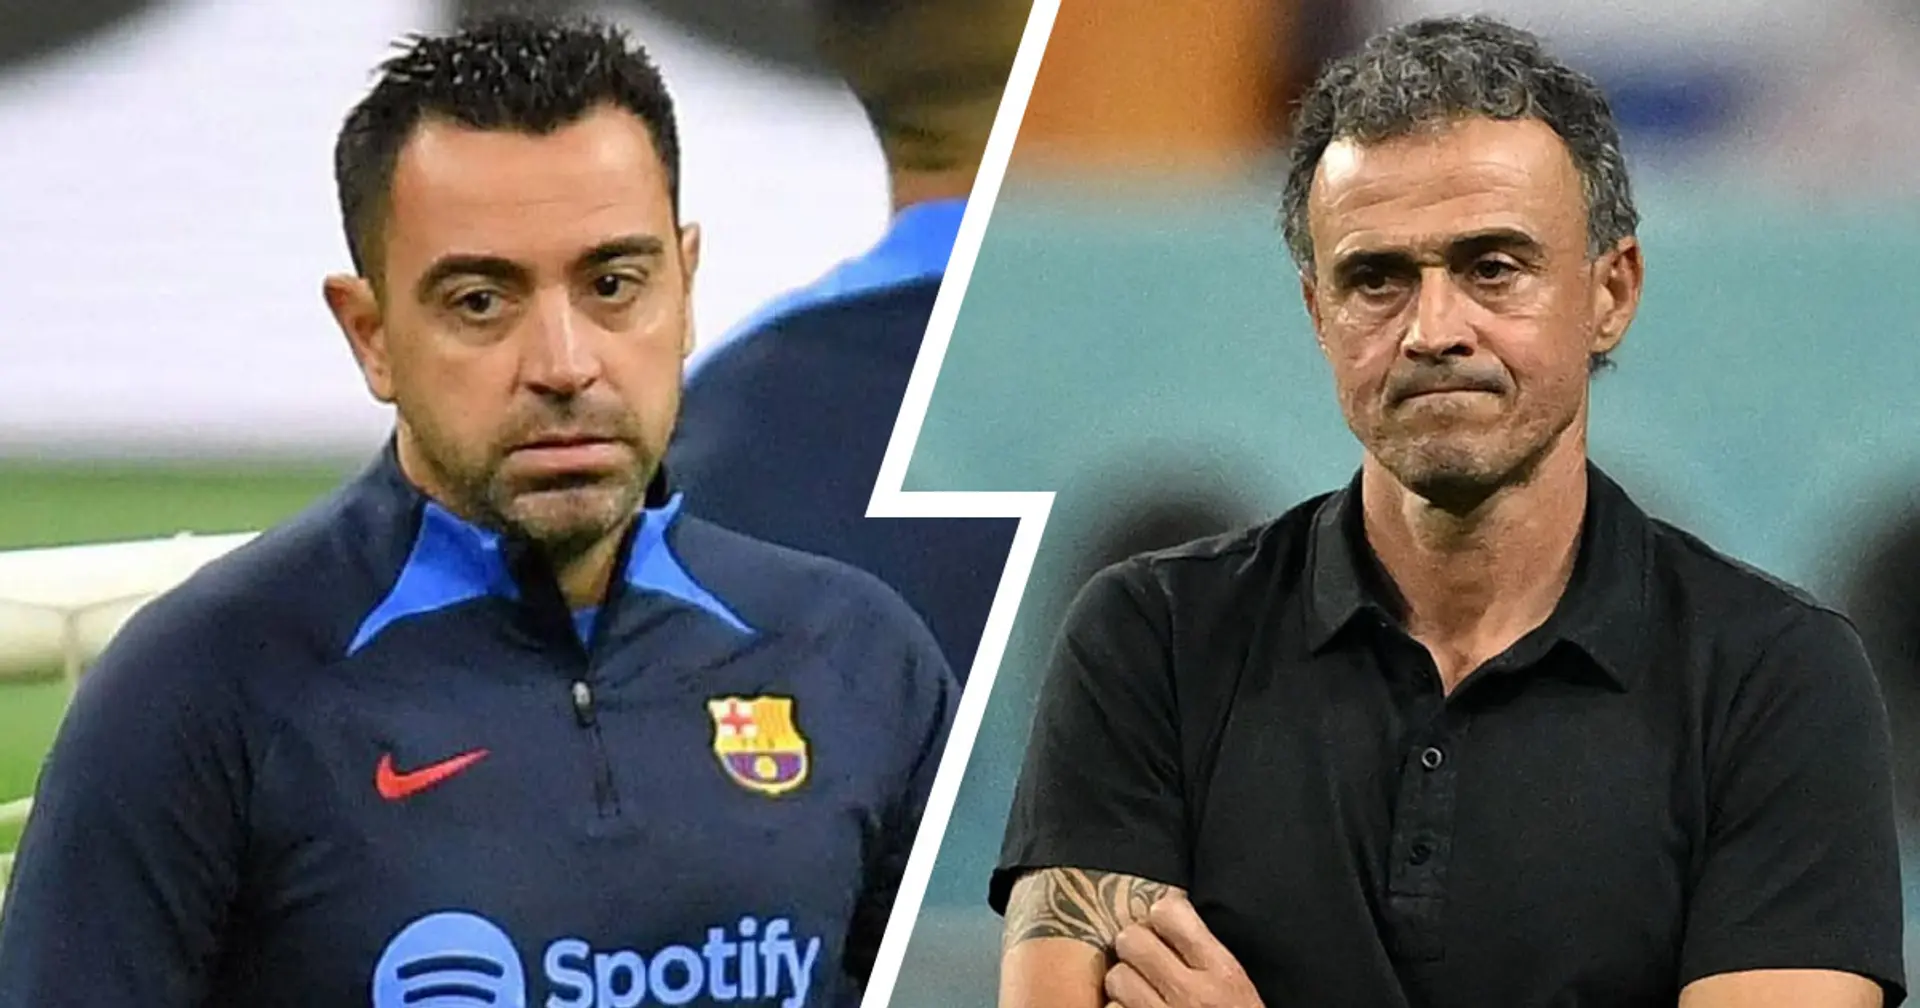 With Luis Enrique free, would you want him to replace Xavi now or at the end of the season?